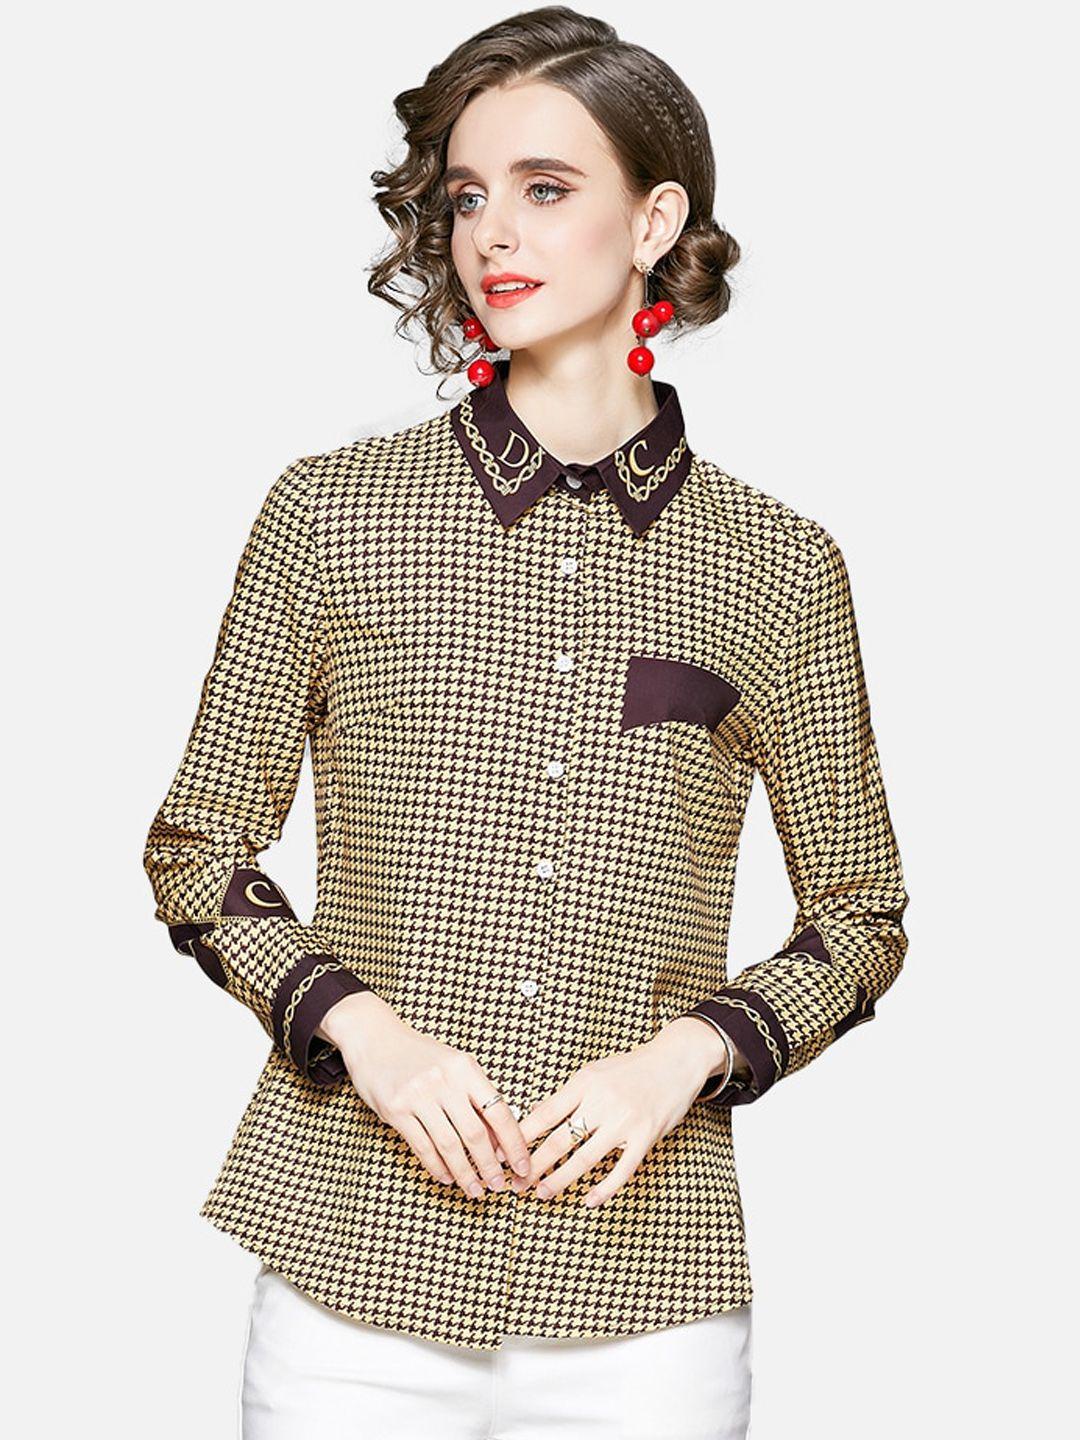 jc collection women beige striped casual shirt